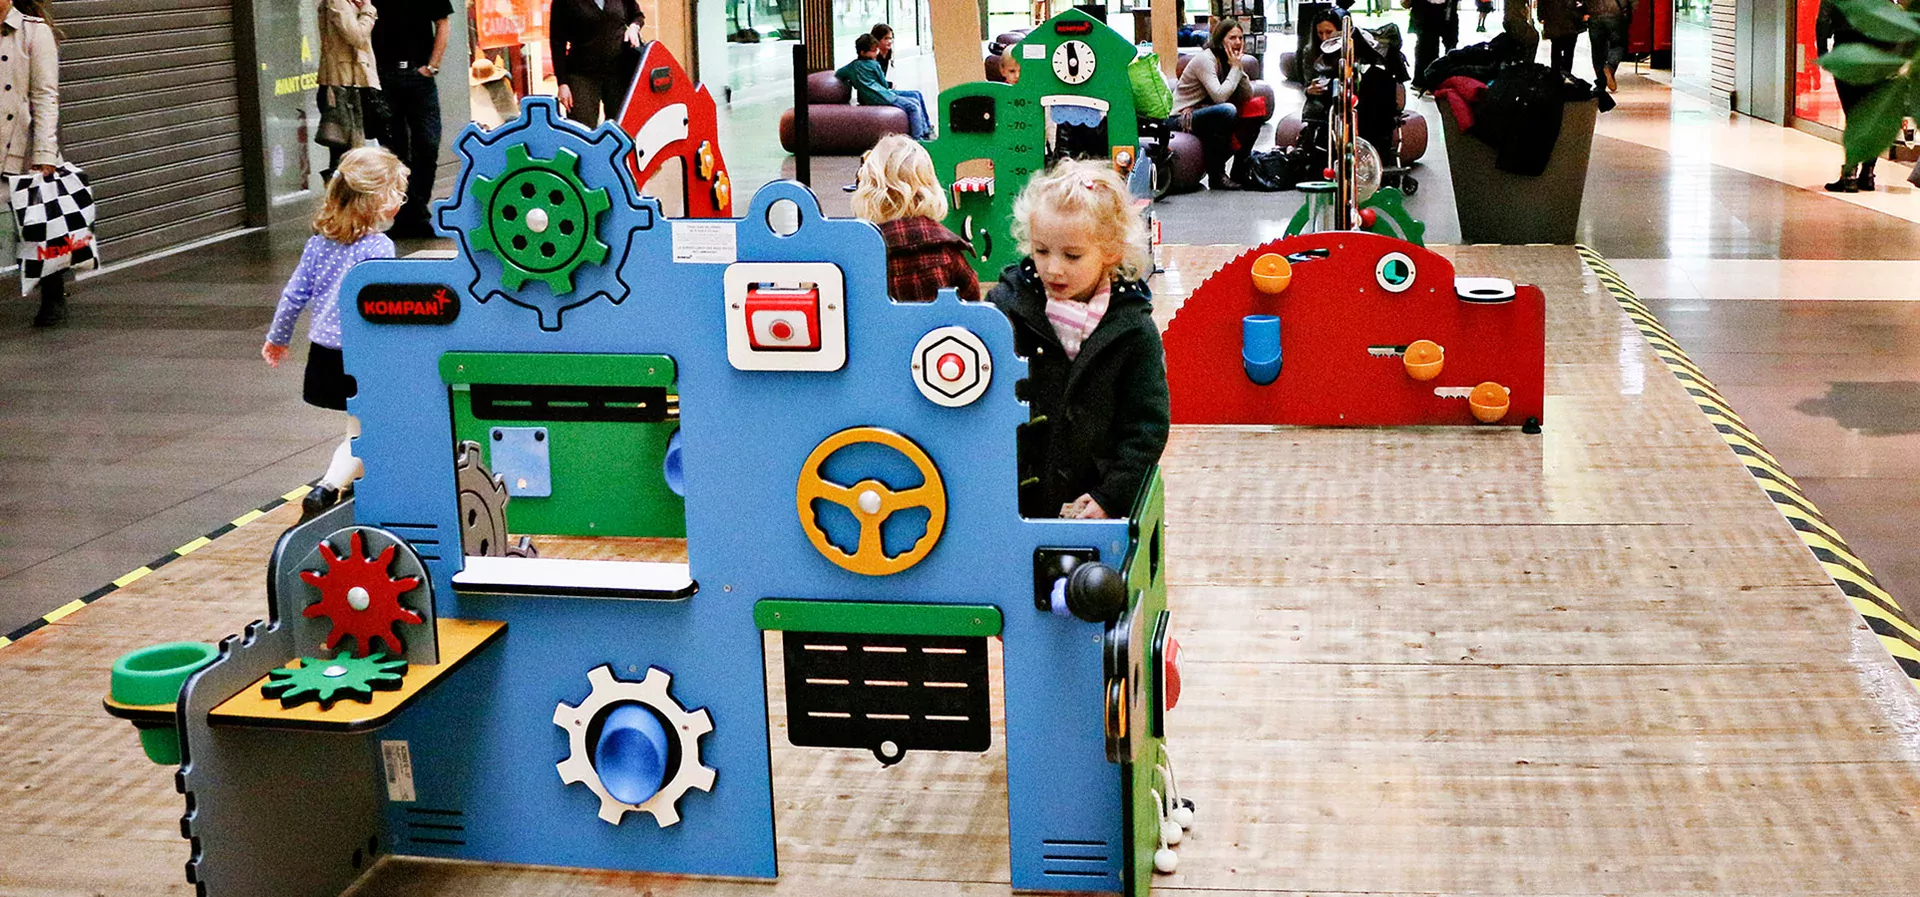 children playing indoor at a mall on service and workshop toddler station